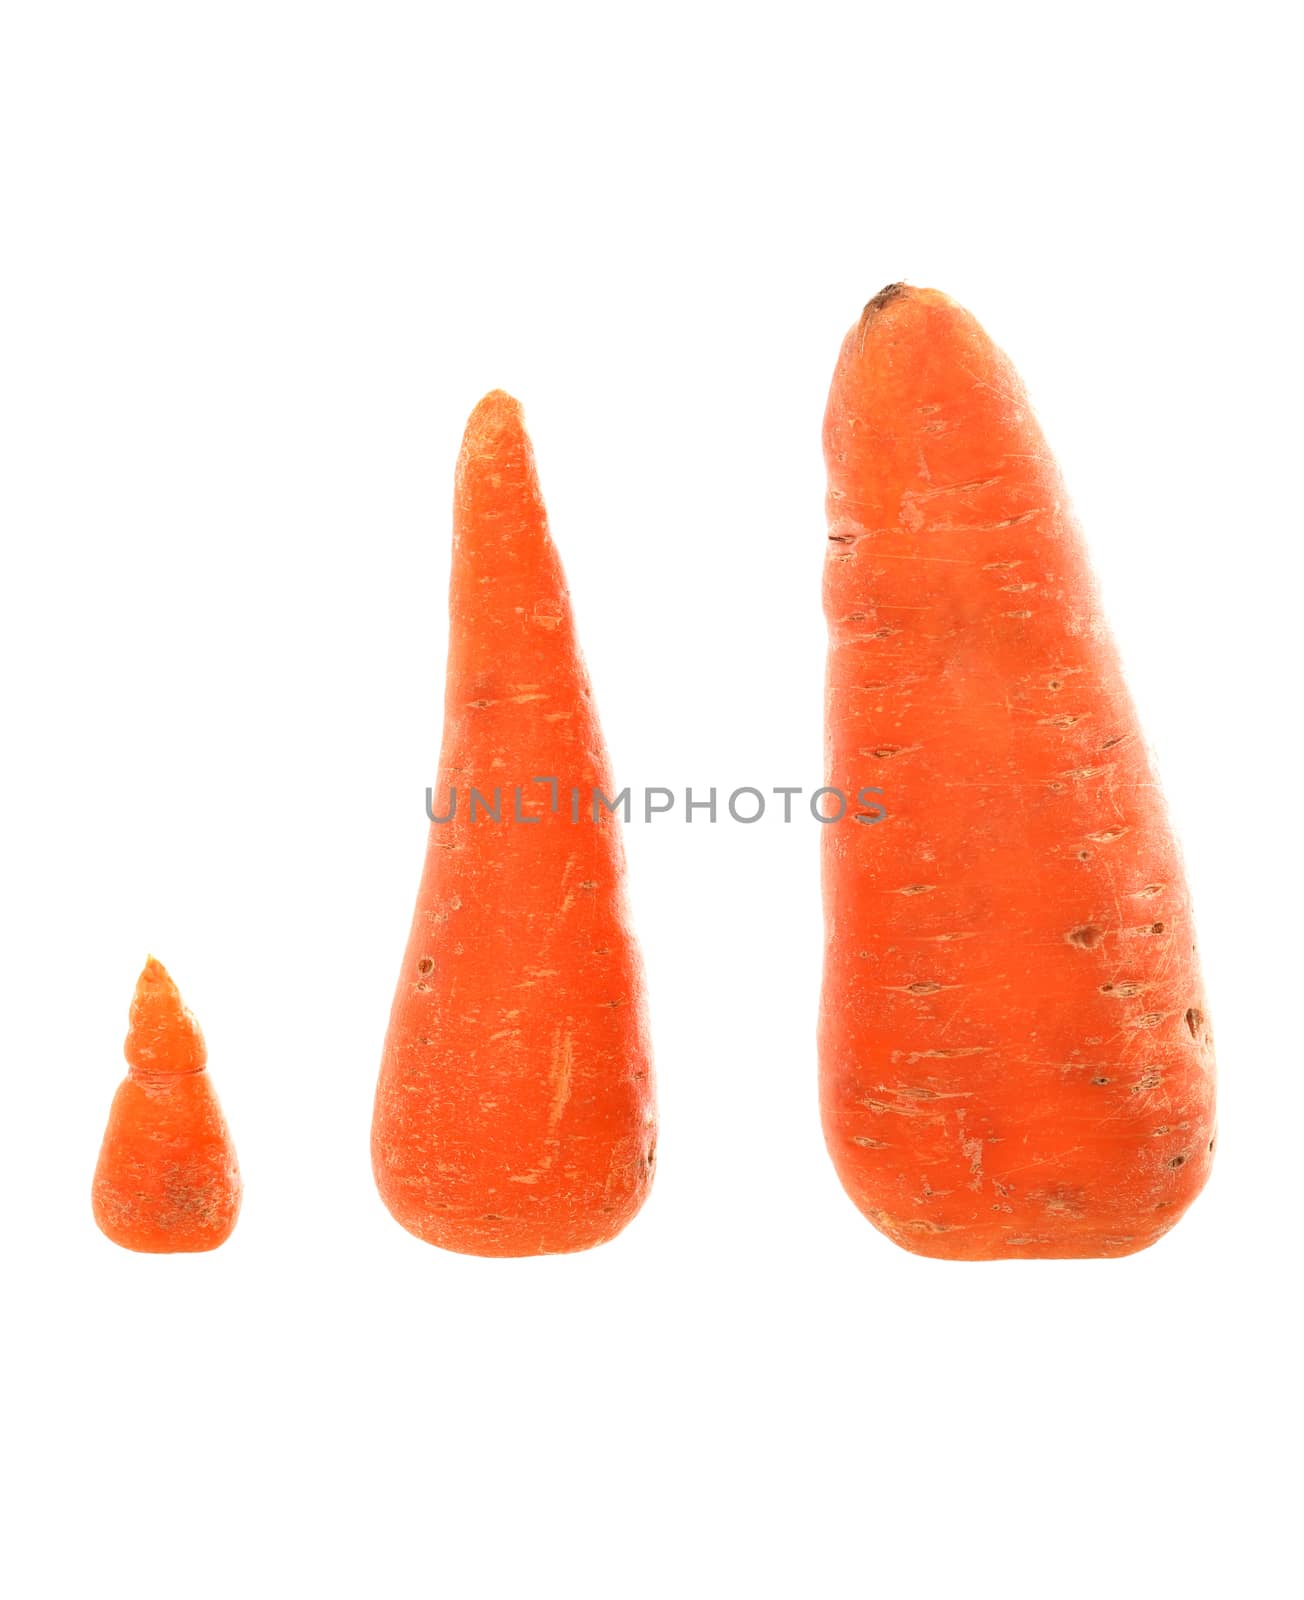 Family concept. Three different raw carrots on white background